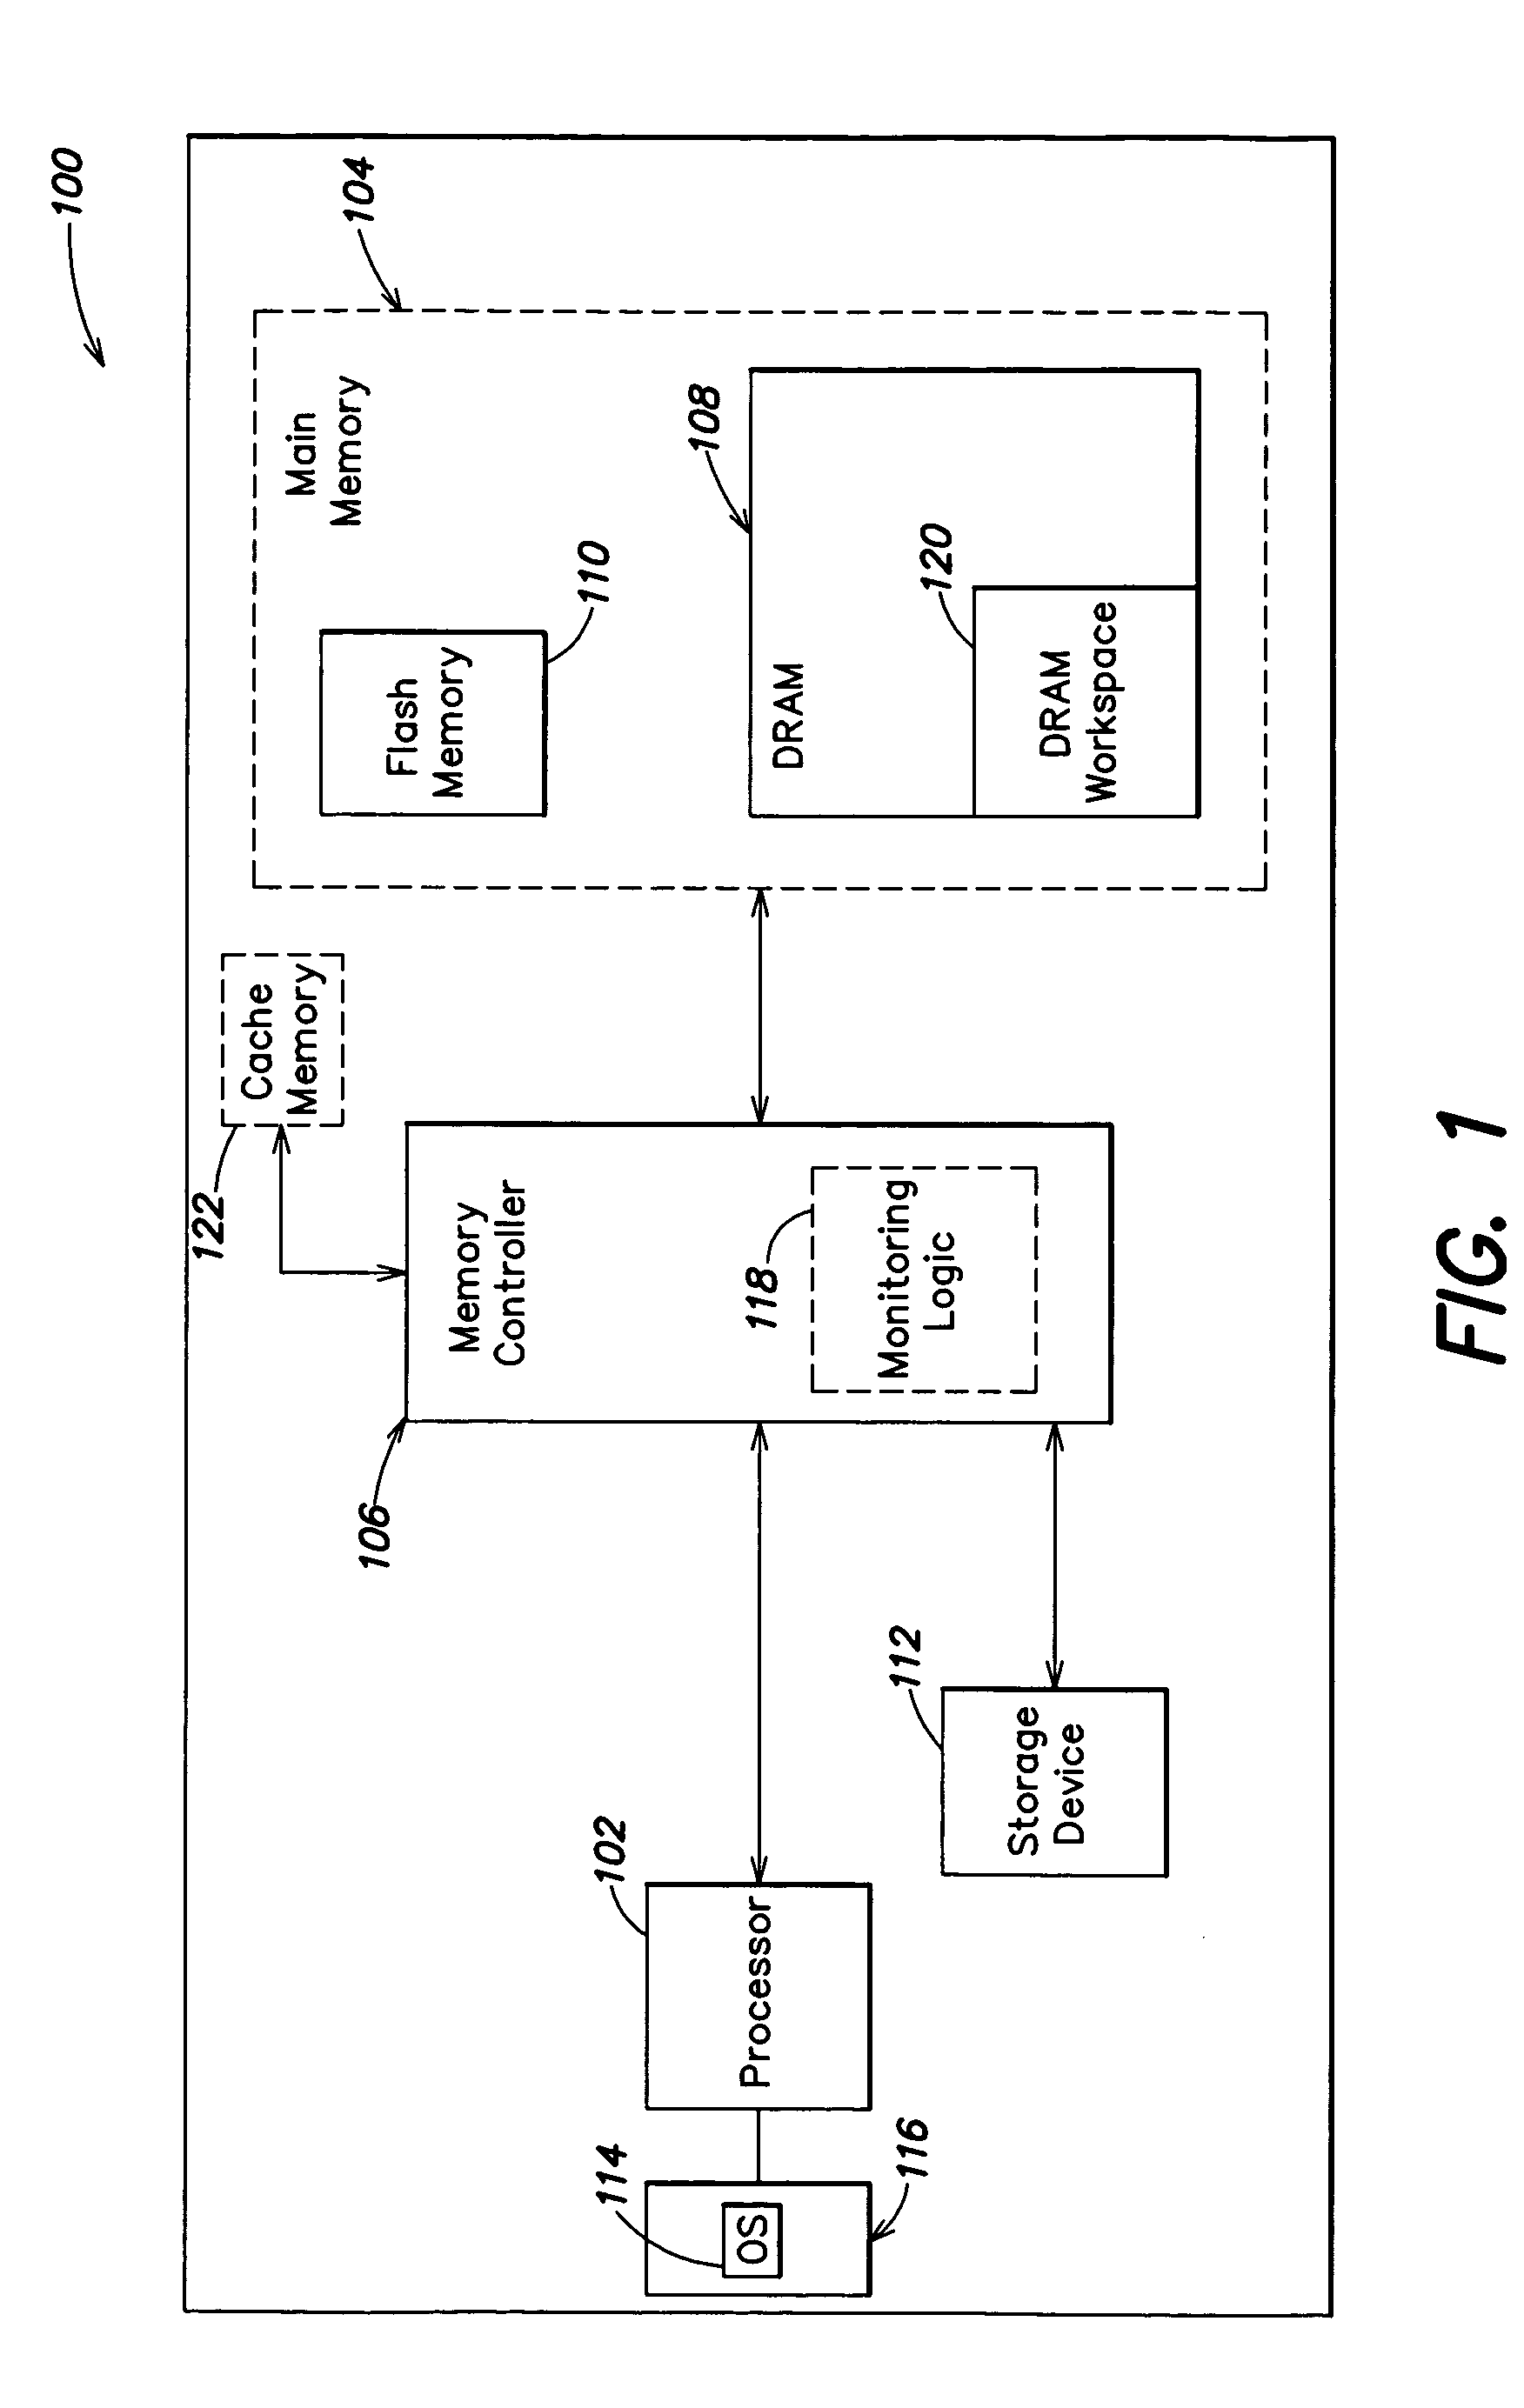 Efficient memory usage in systems including volatile and high-density memories